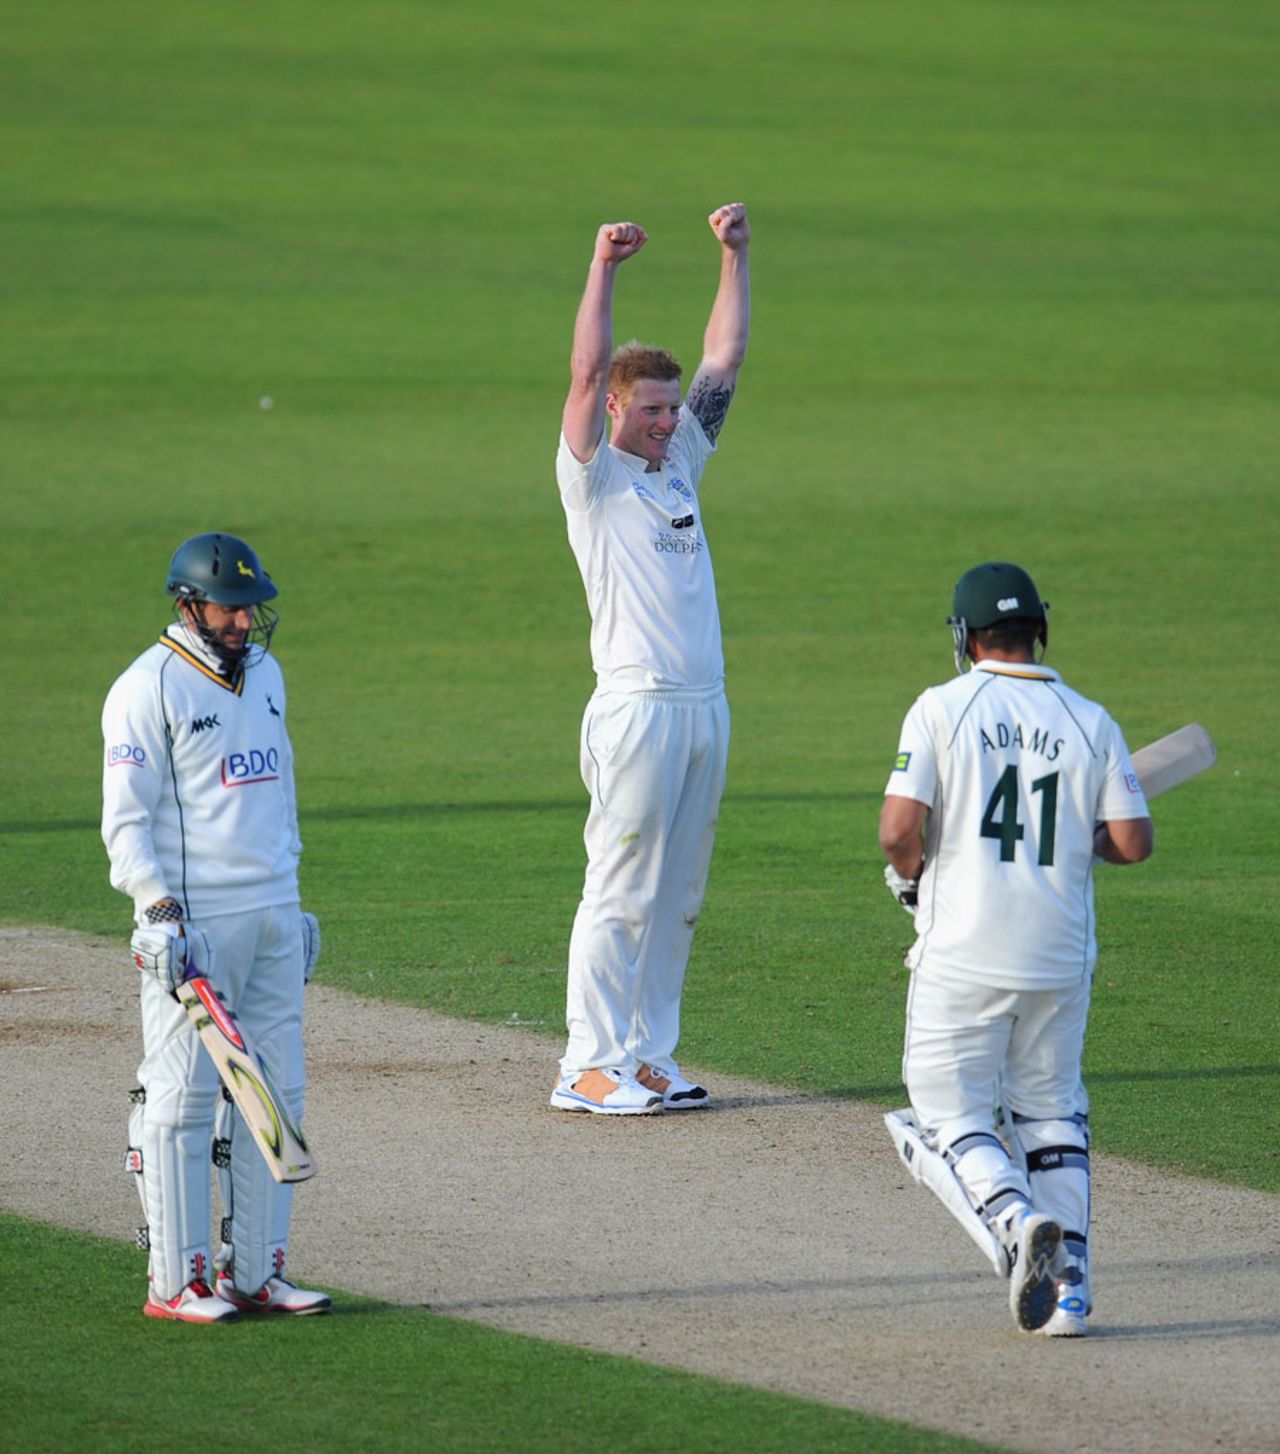 Ben Stokes battled pain to take three wickets, Durham v Nottinghamshire, County Championship, Division One, Chester-le-Street, September 18, 2013